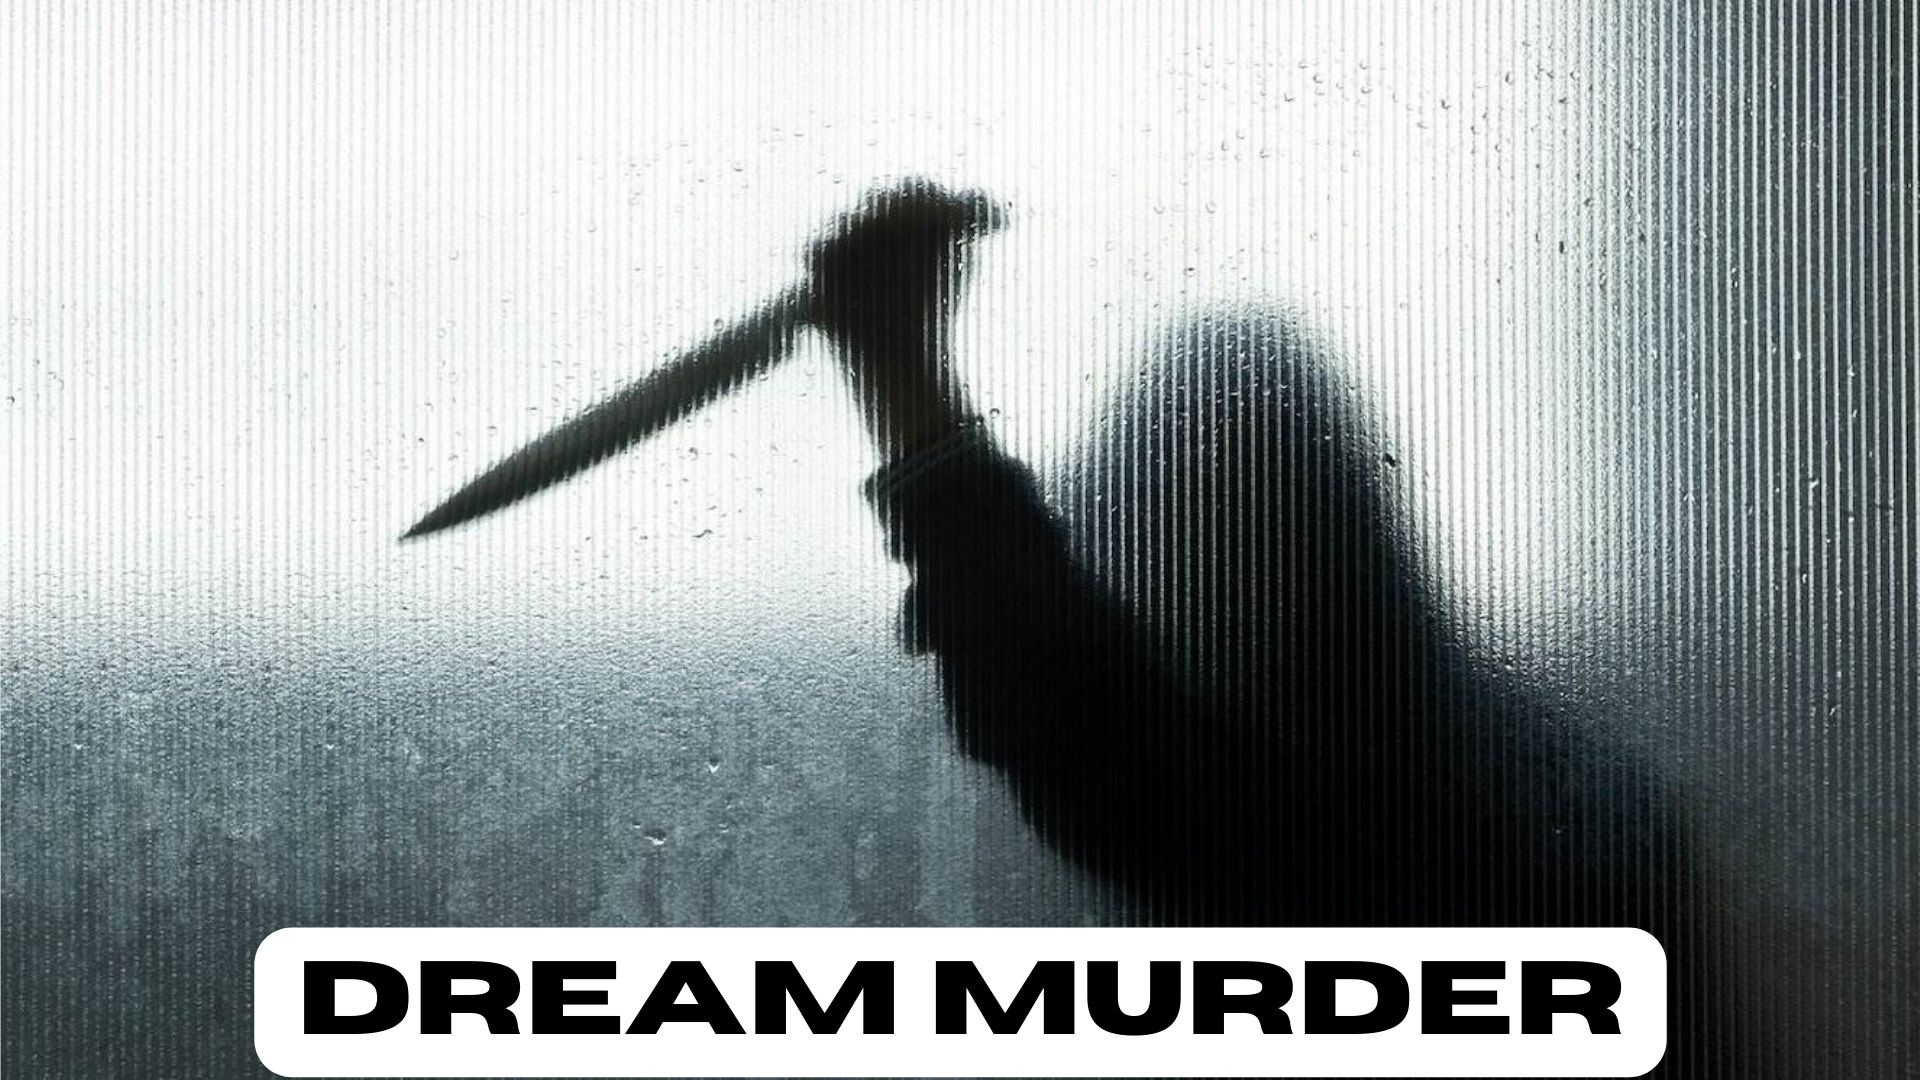 Dream Murder - Symbolize Endings, Which Give Way To New Beginnings